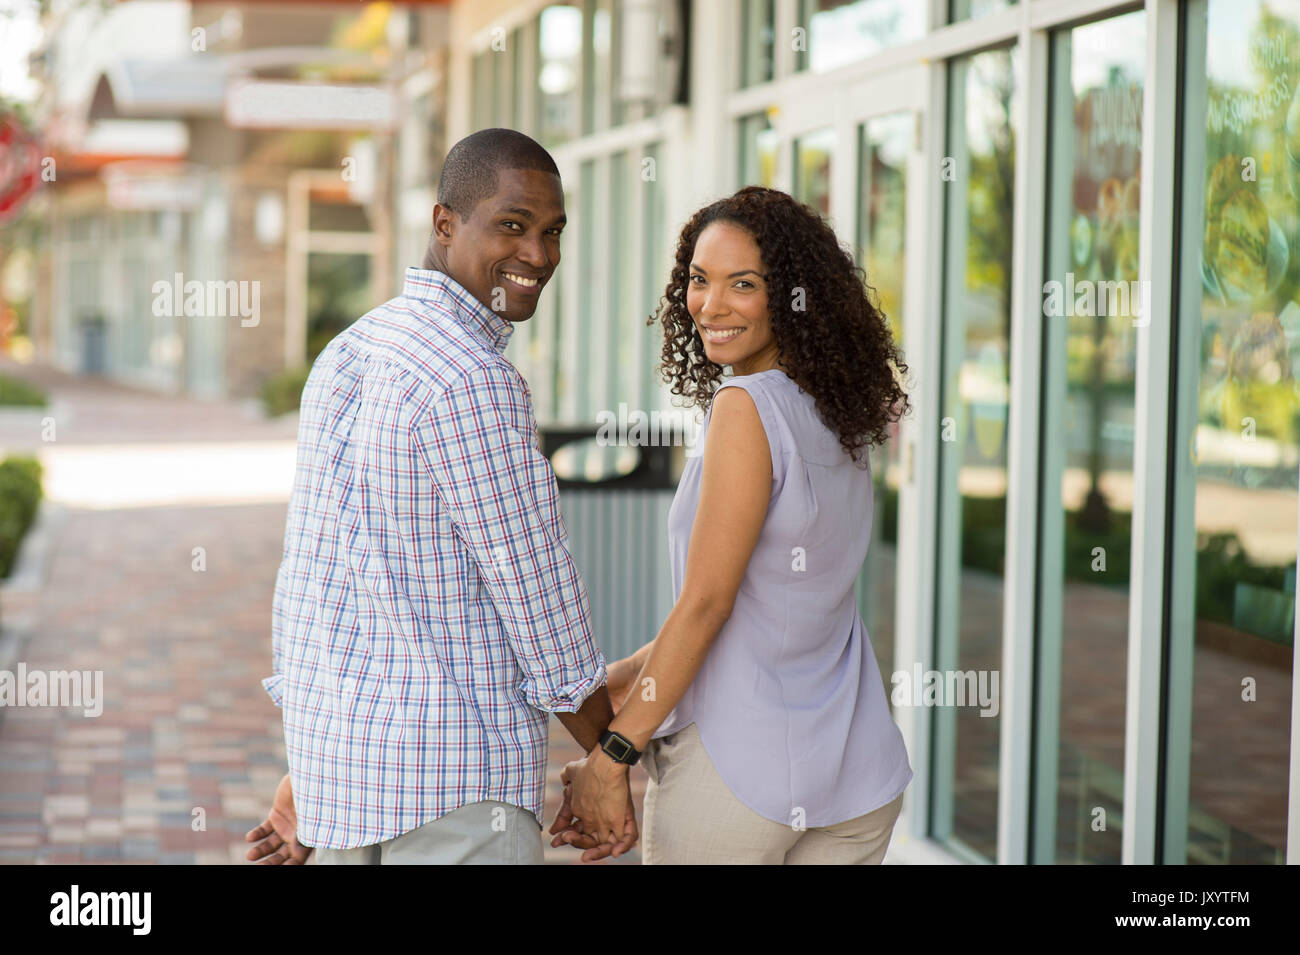 Portrait of smiling couple holding hands and looking at camera Banque D'Images